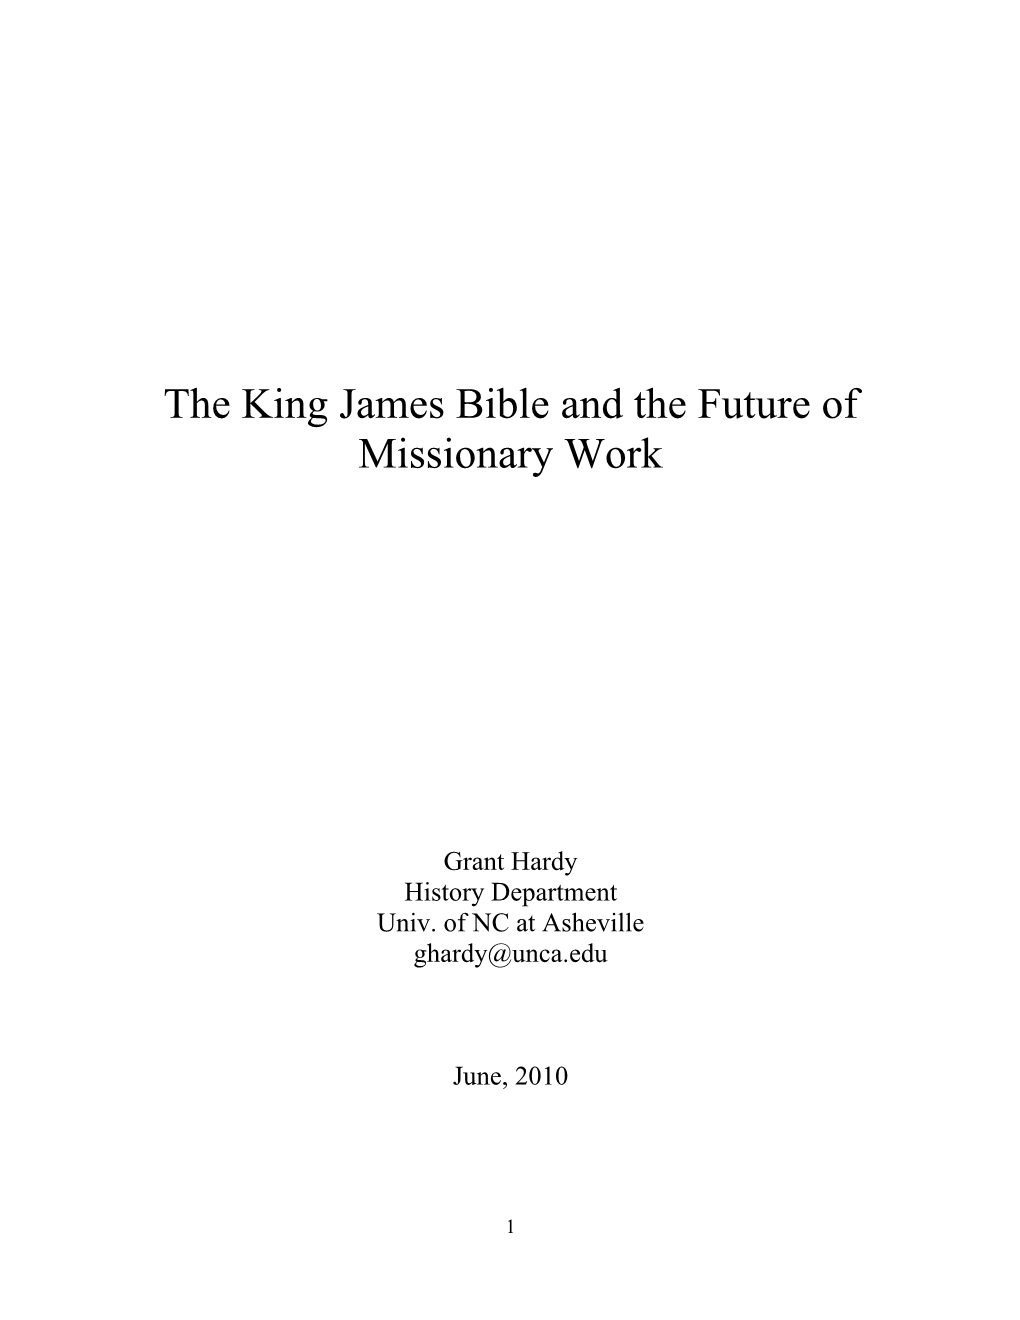 The King James Bible and the Future of Missionary Work